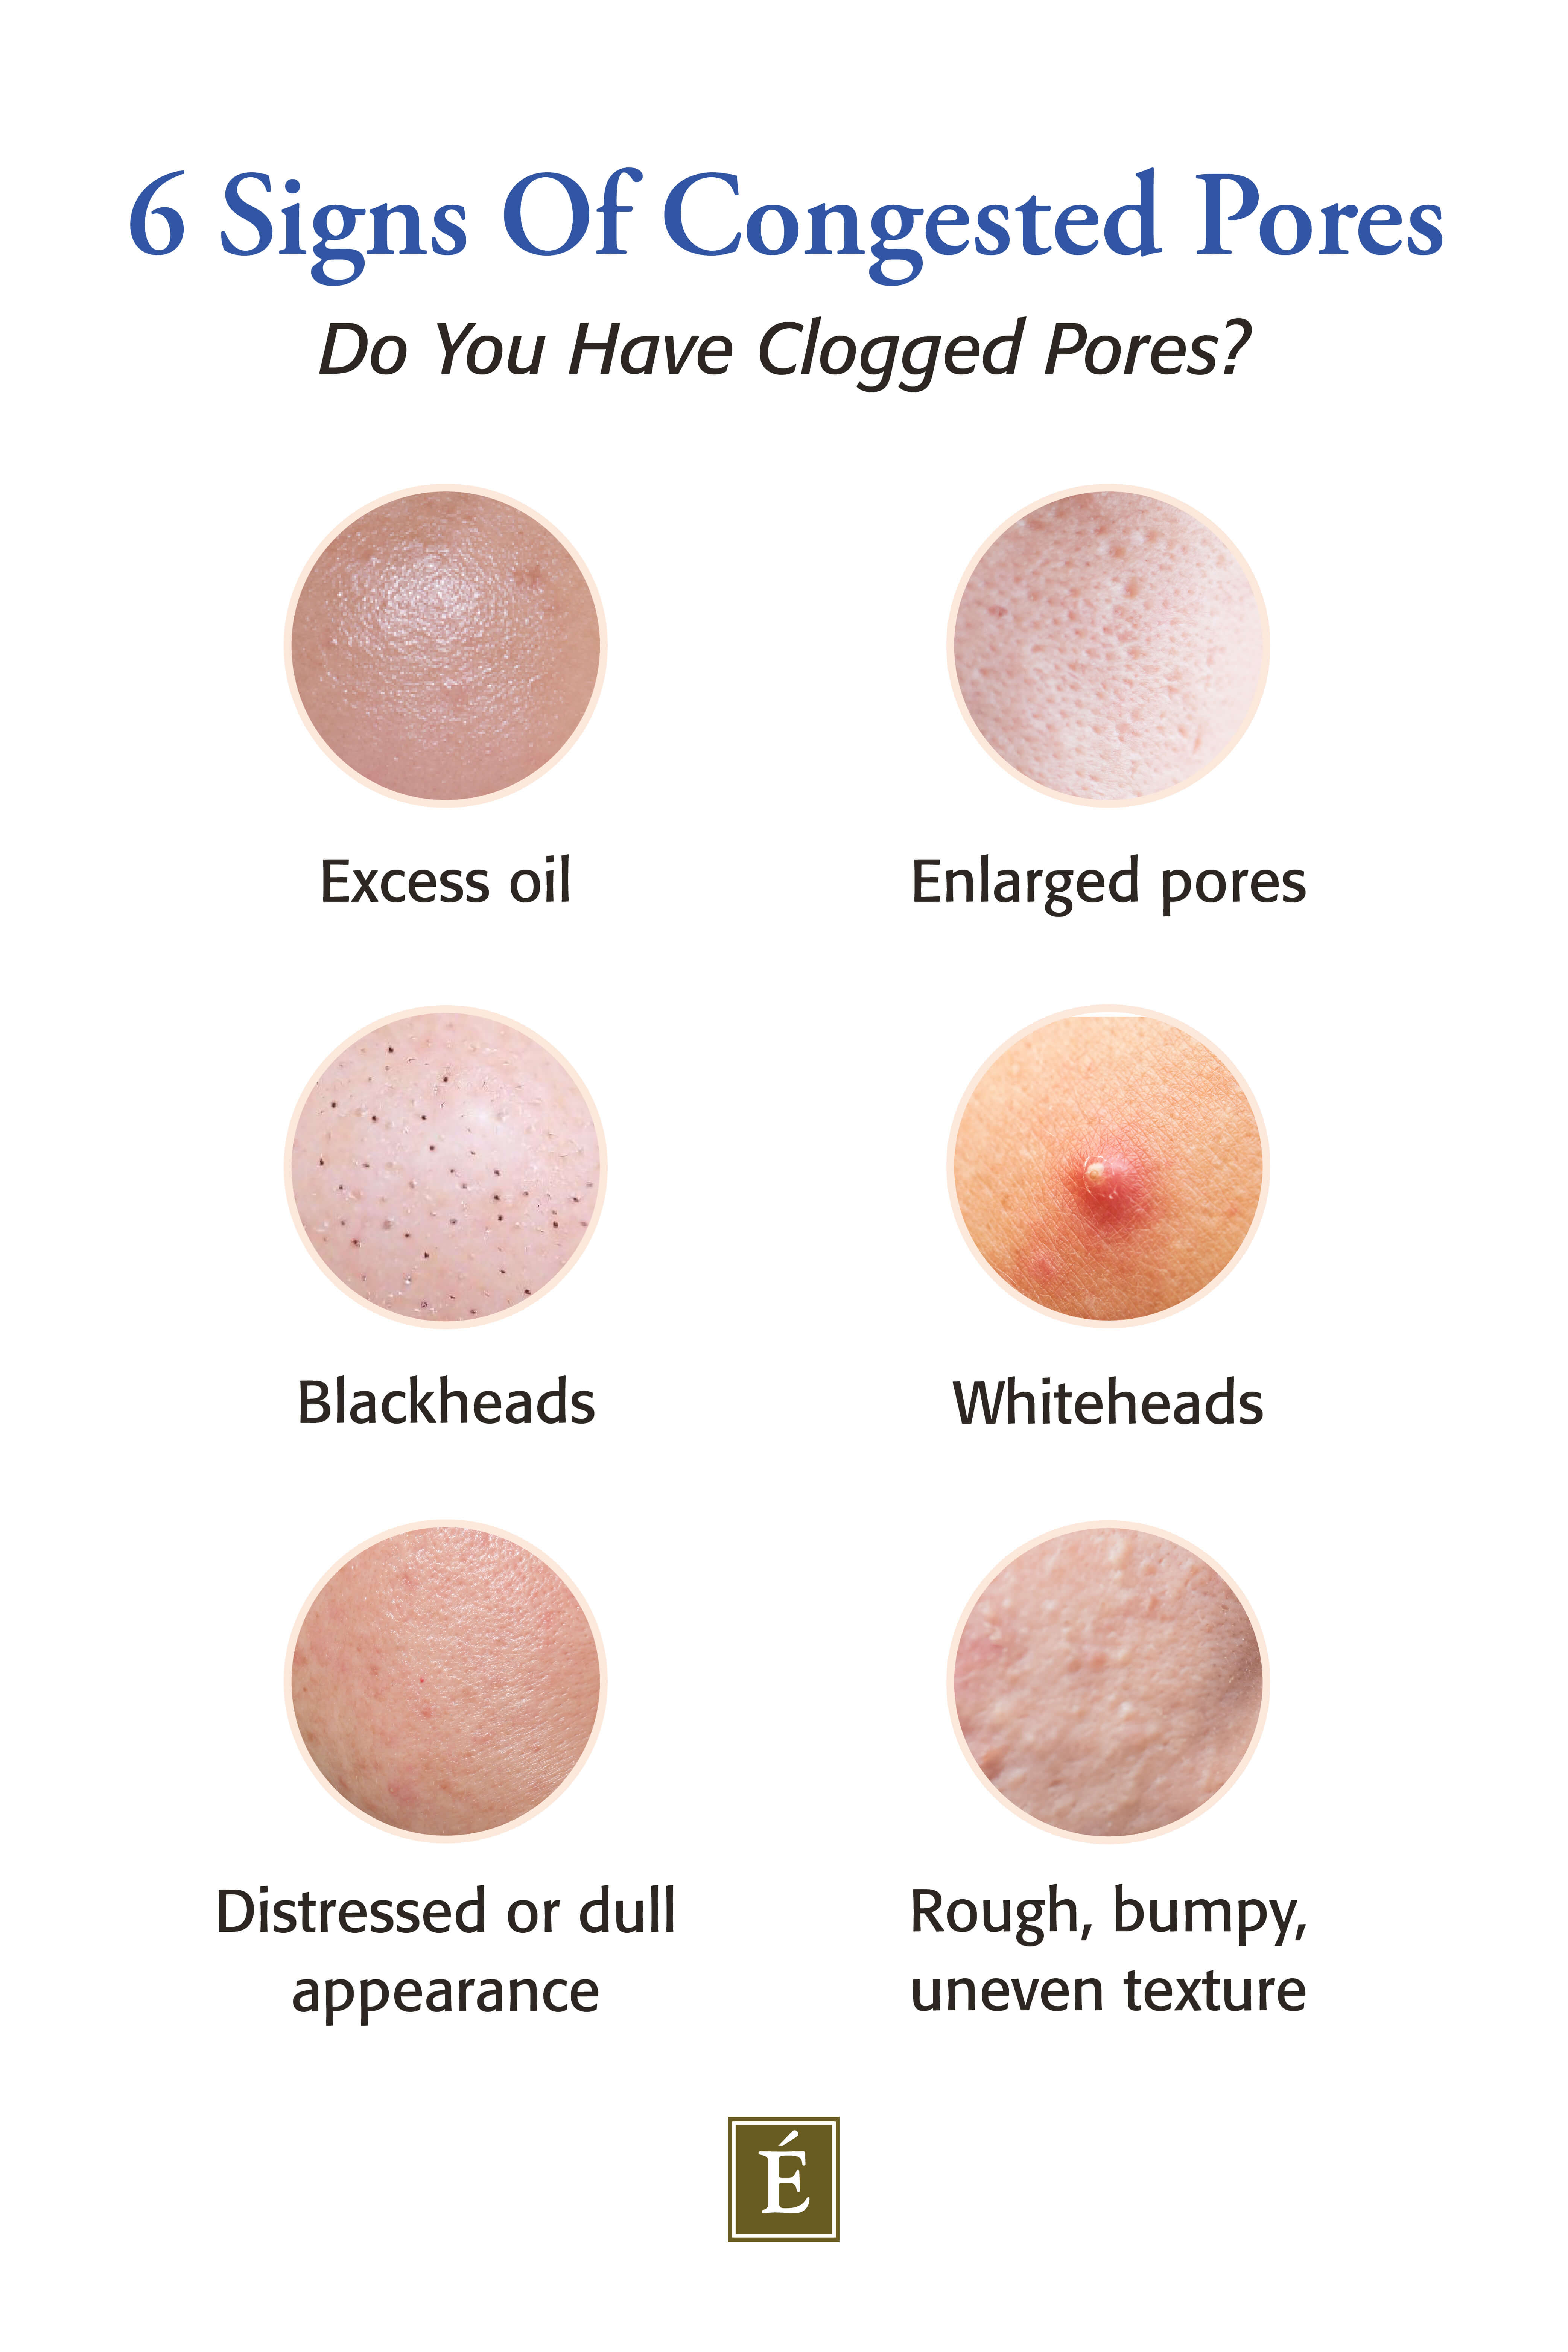 Signs of congested pores